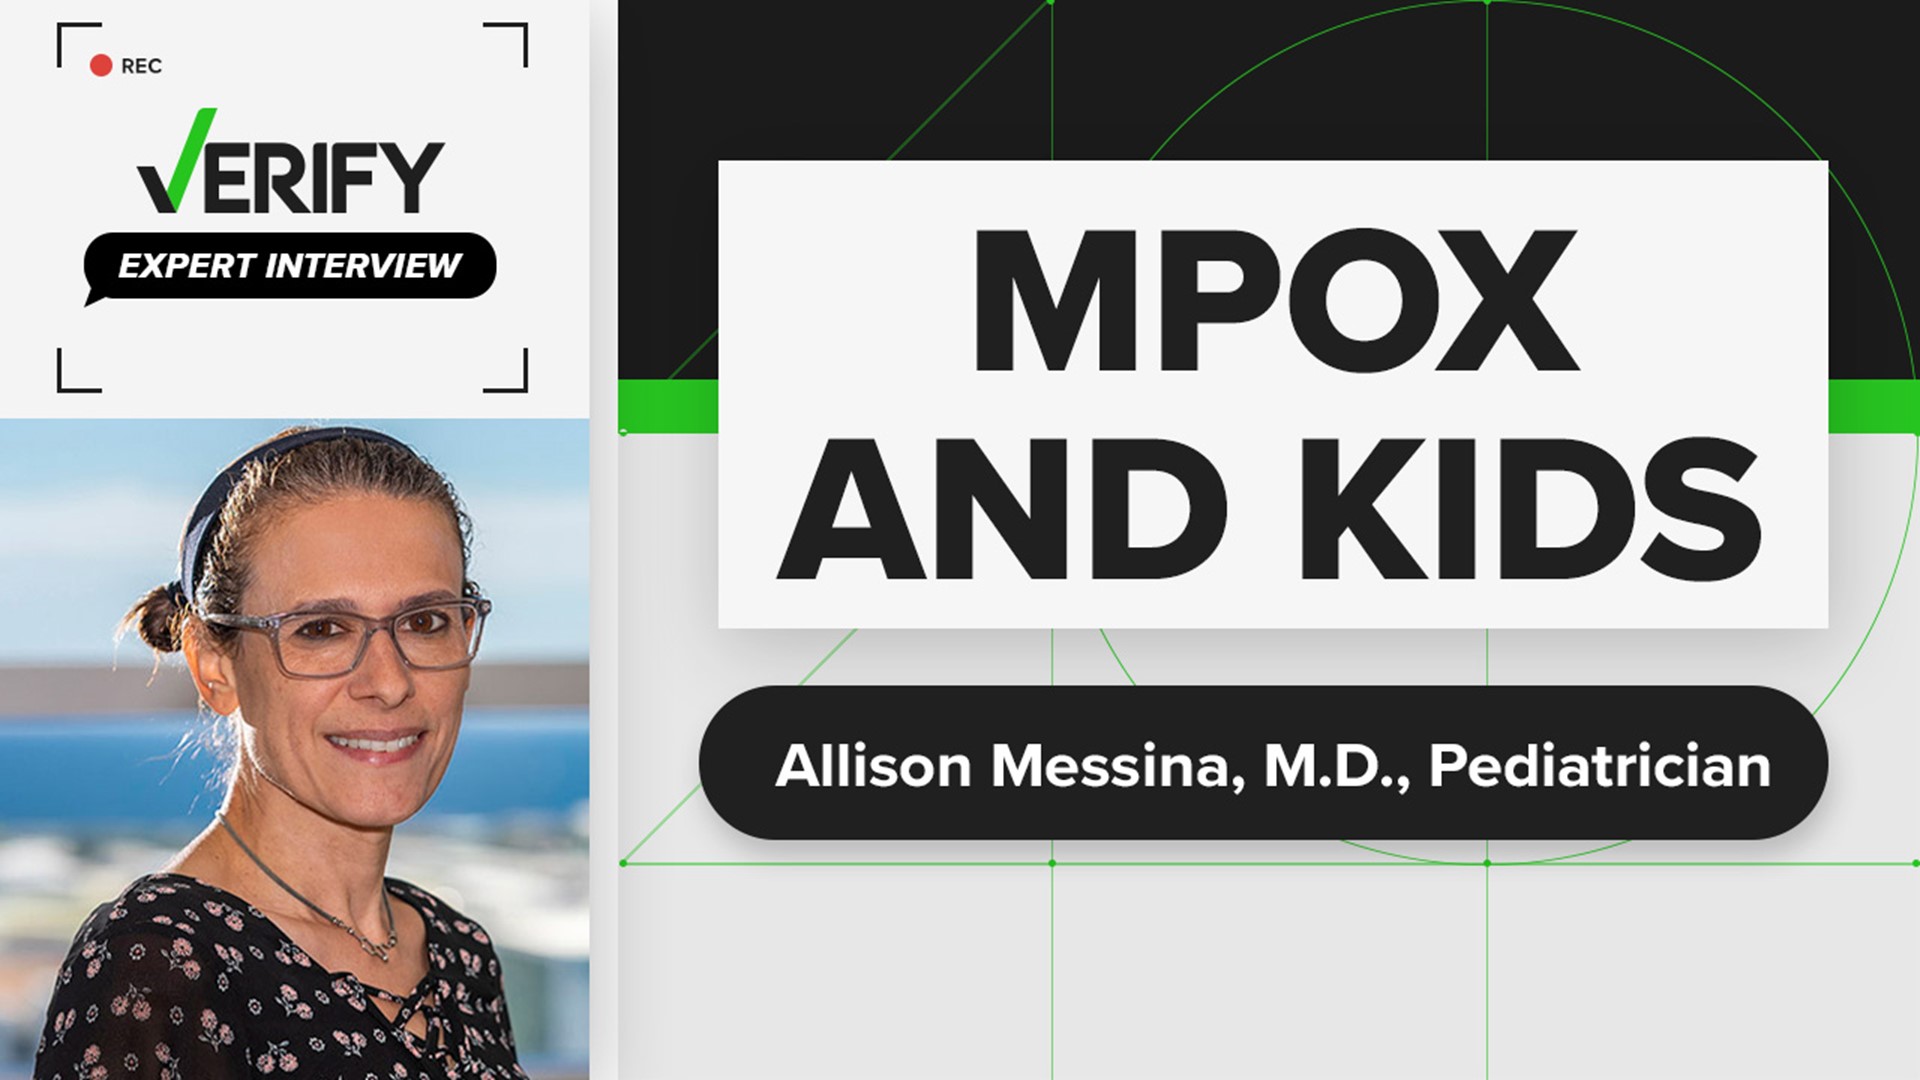 People have questions about how mpox affects kids. Pediatric infectious disease specialist, Allison Messina, M.D., speaks on the topic.